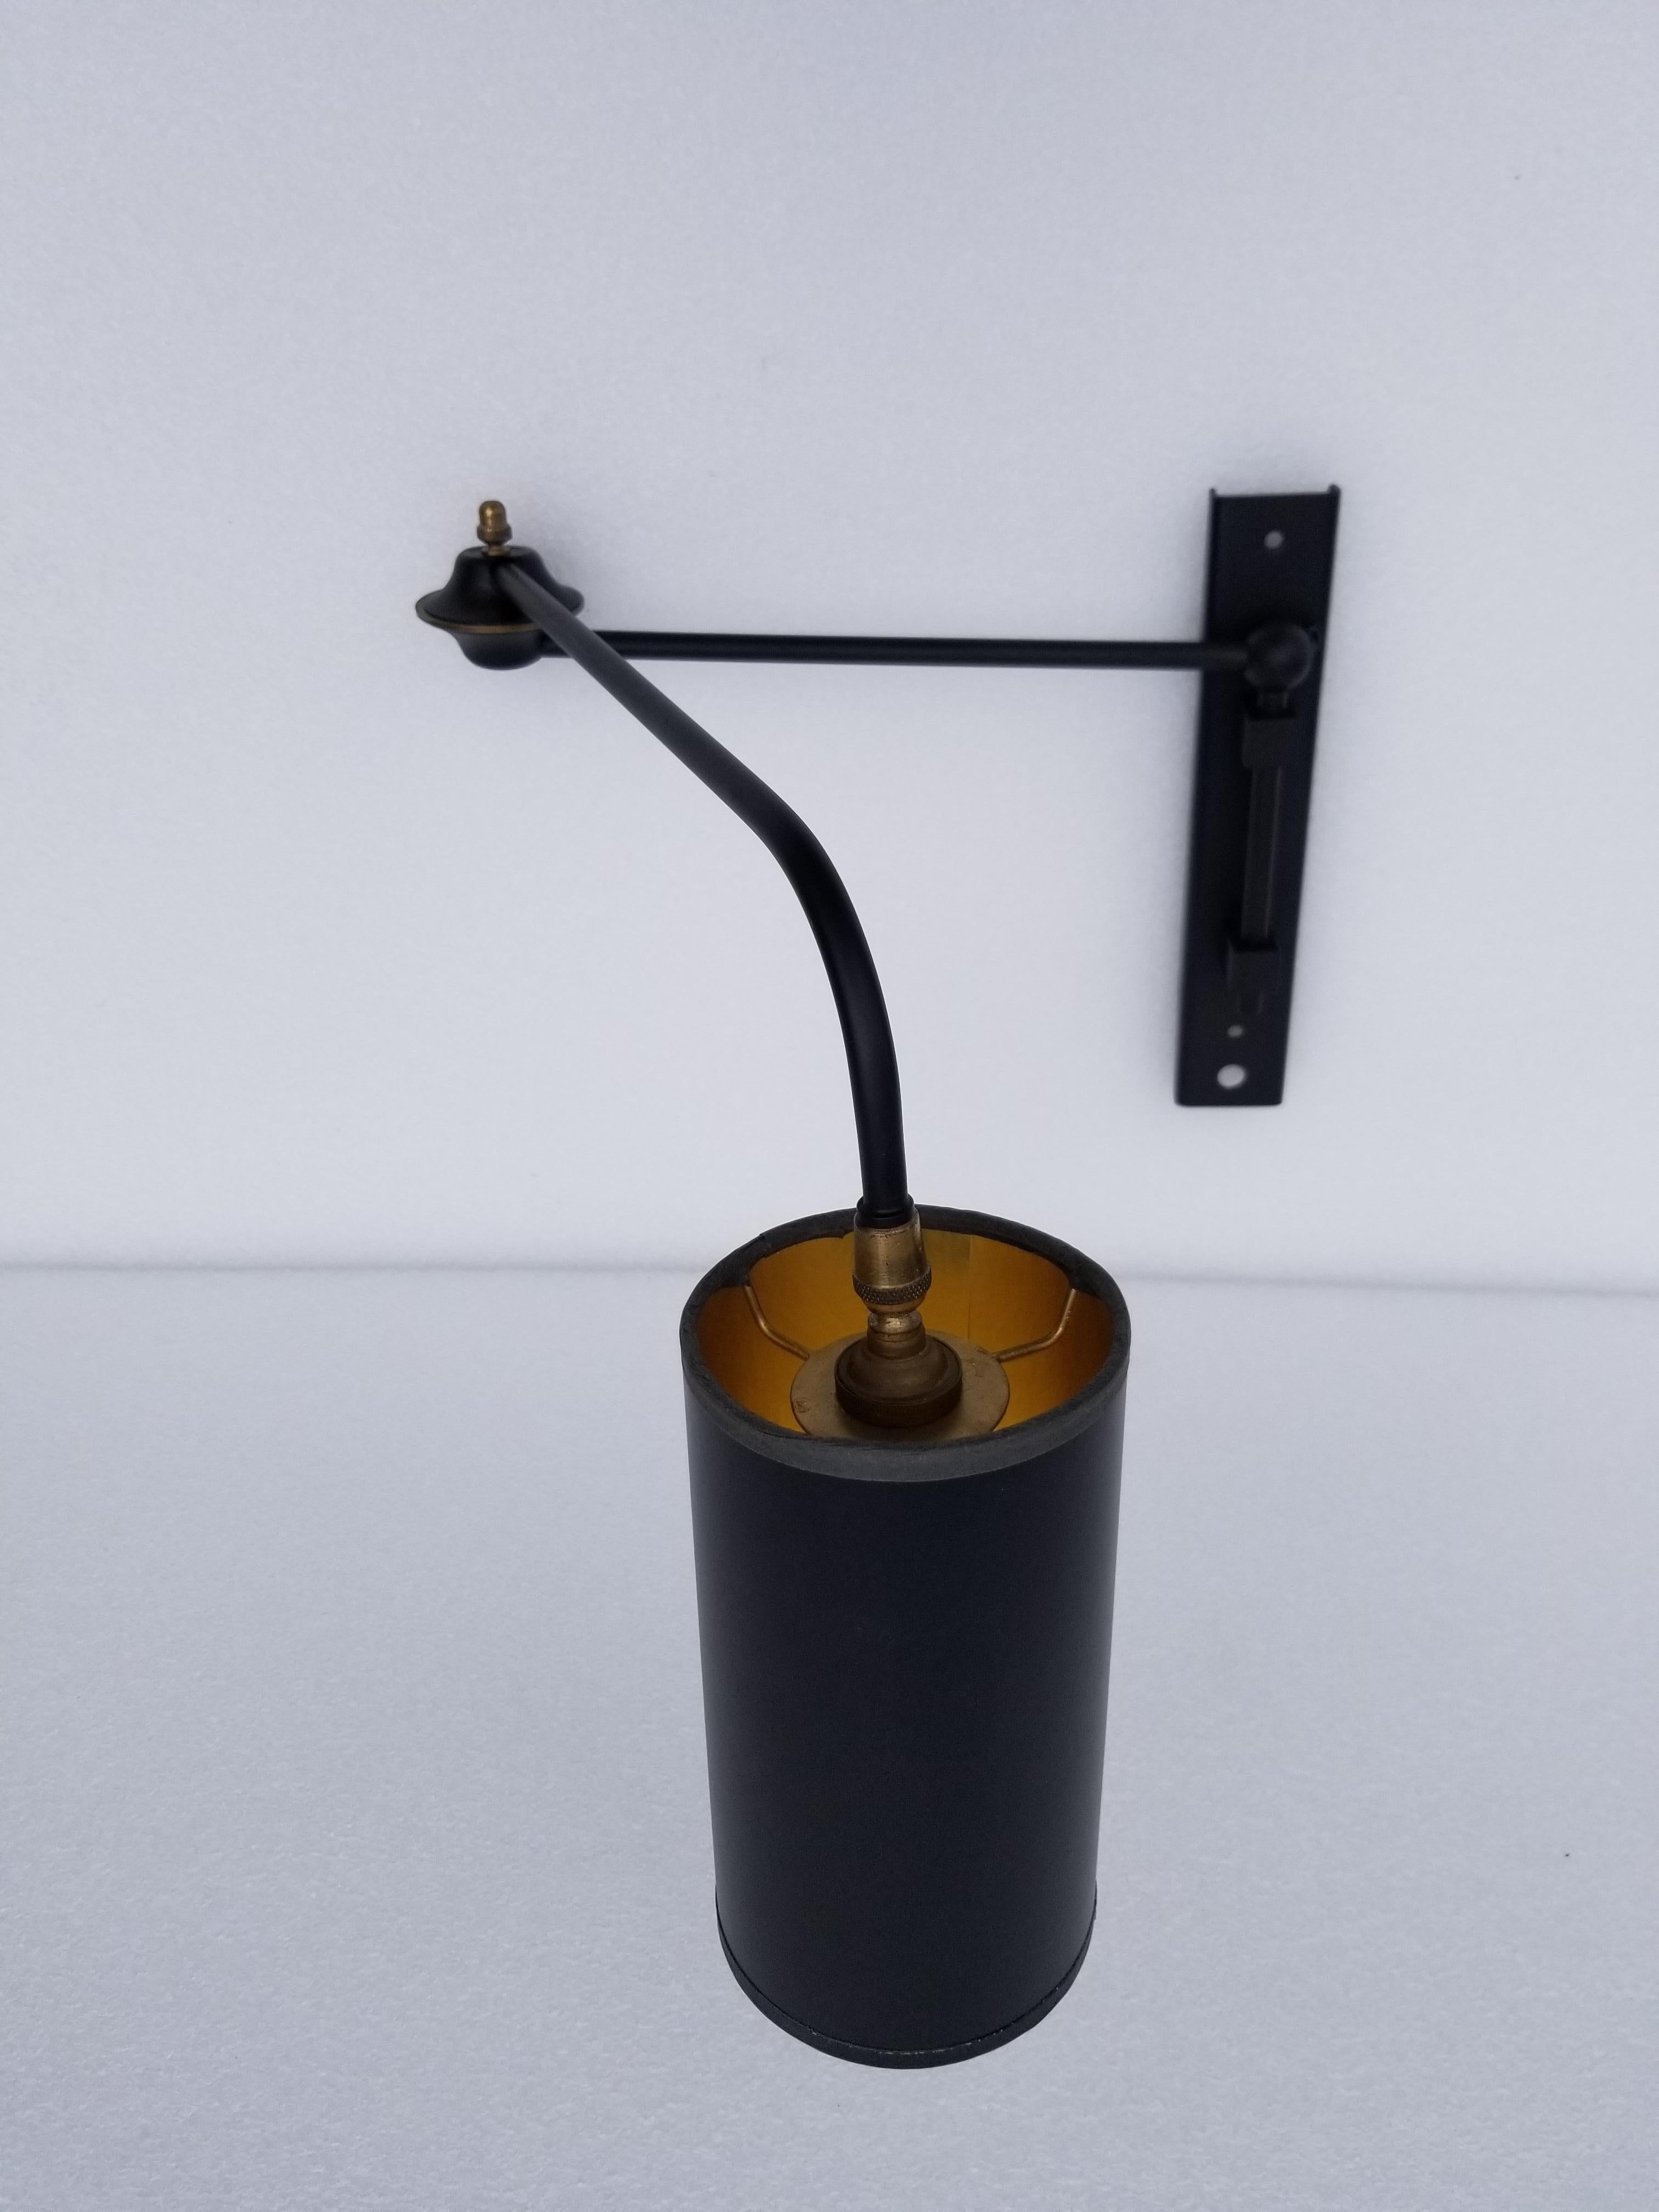 Maison Lunel retractable wall light, one-light, 60 watt max.
US rewired and in working condition.
Dimension closed: !6 inches
Dimension max deployed: 28
12 inches high
Back plate: 2 W/ 10 H.